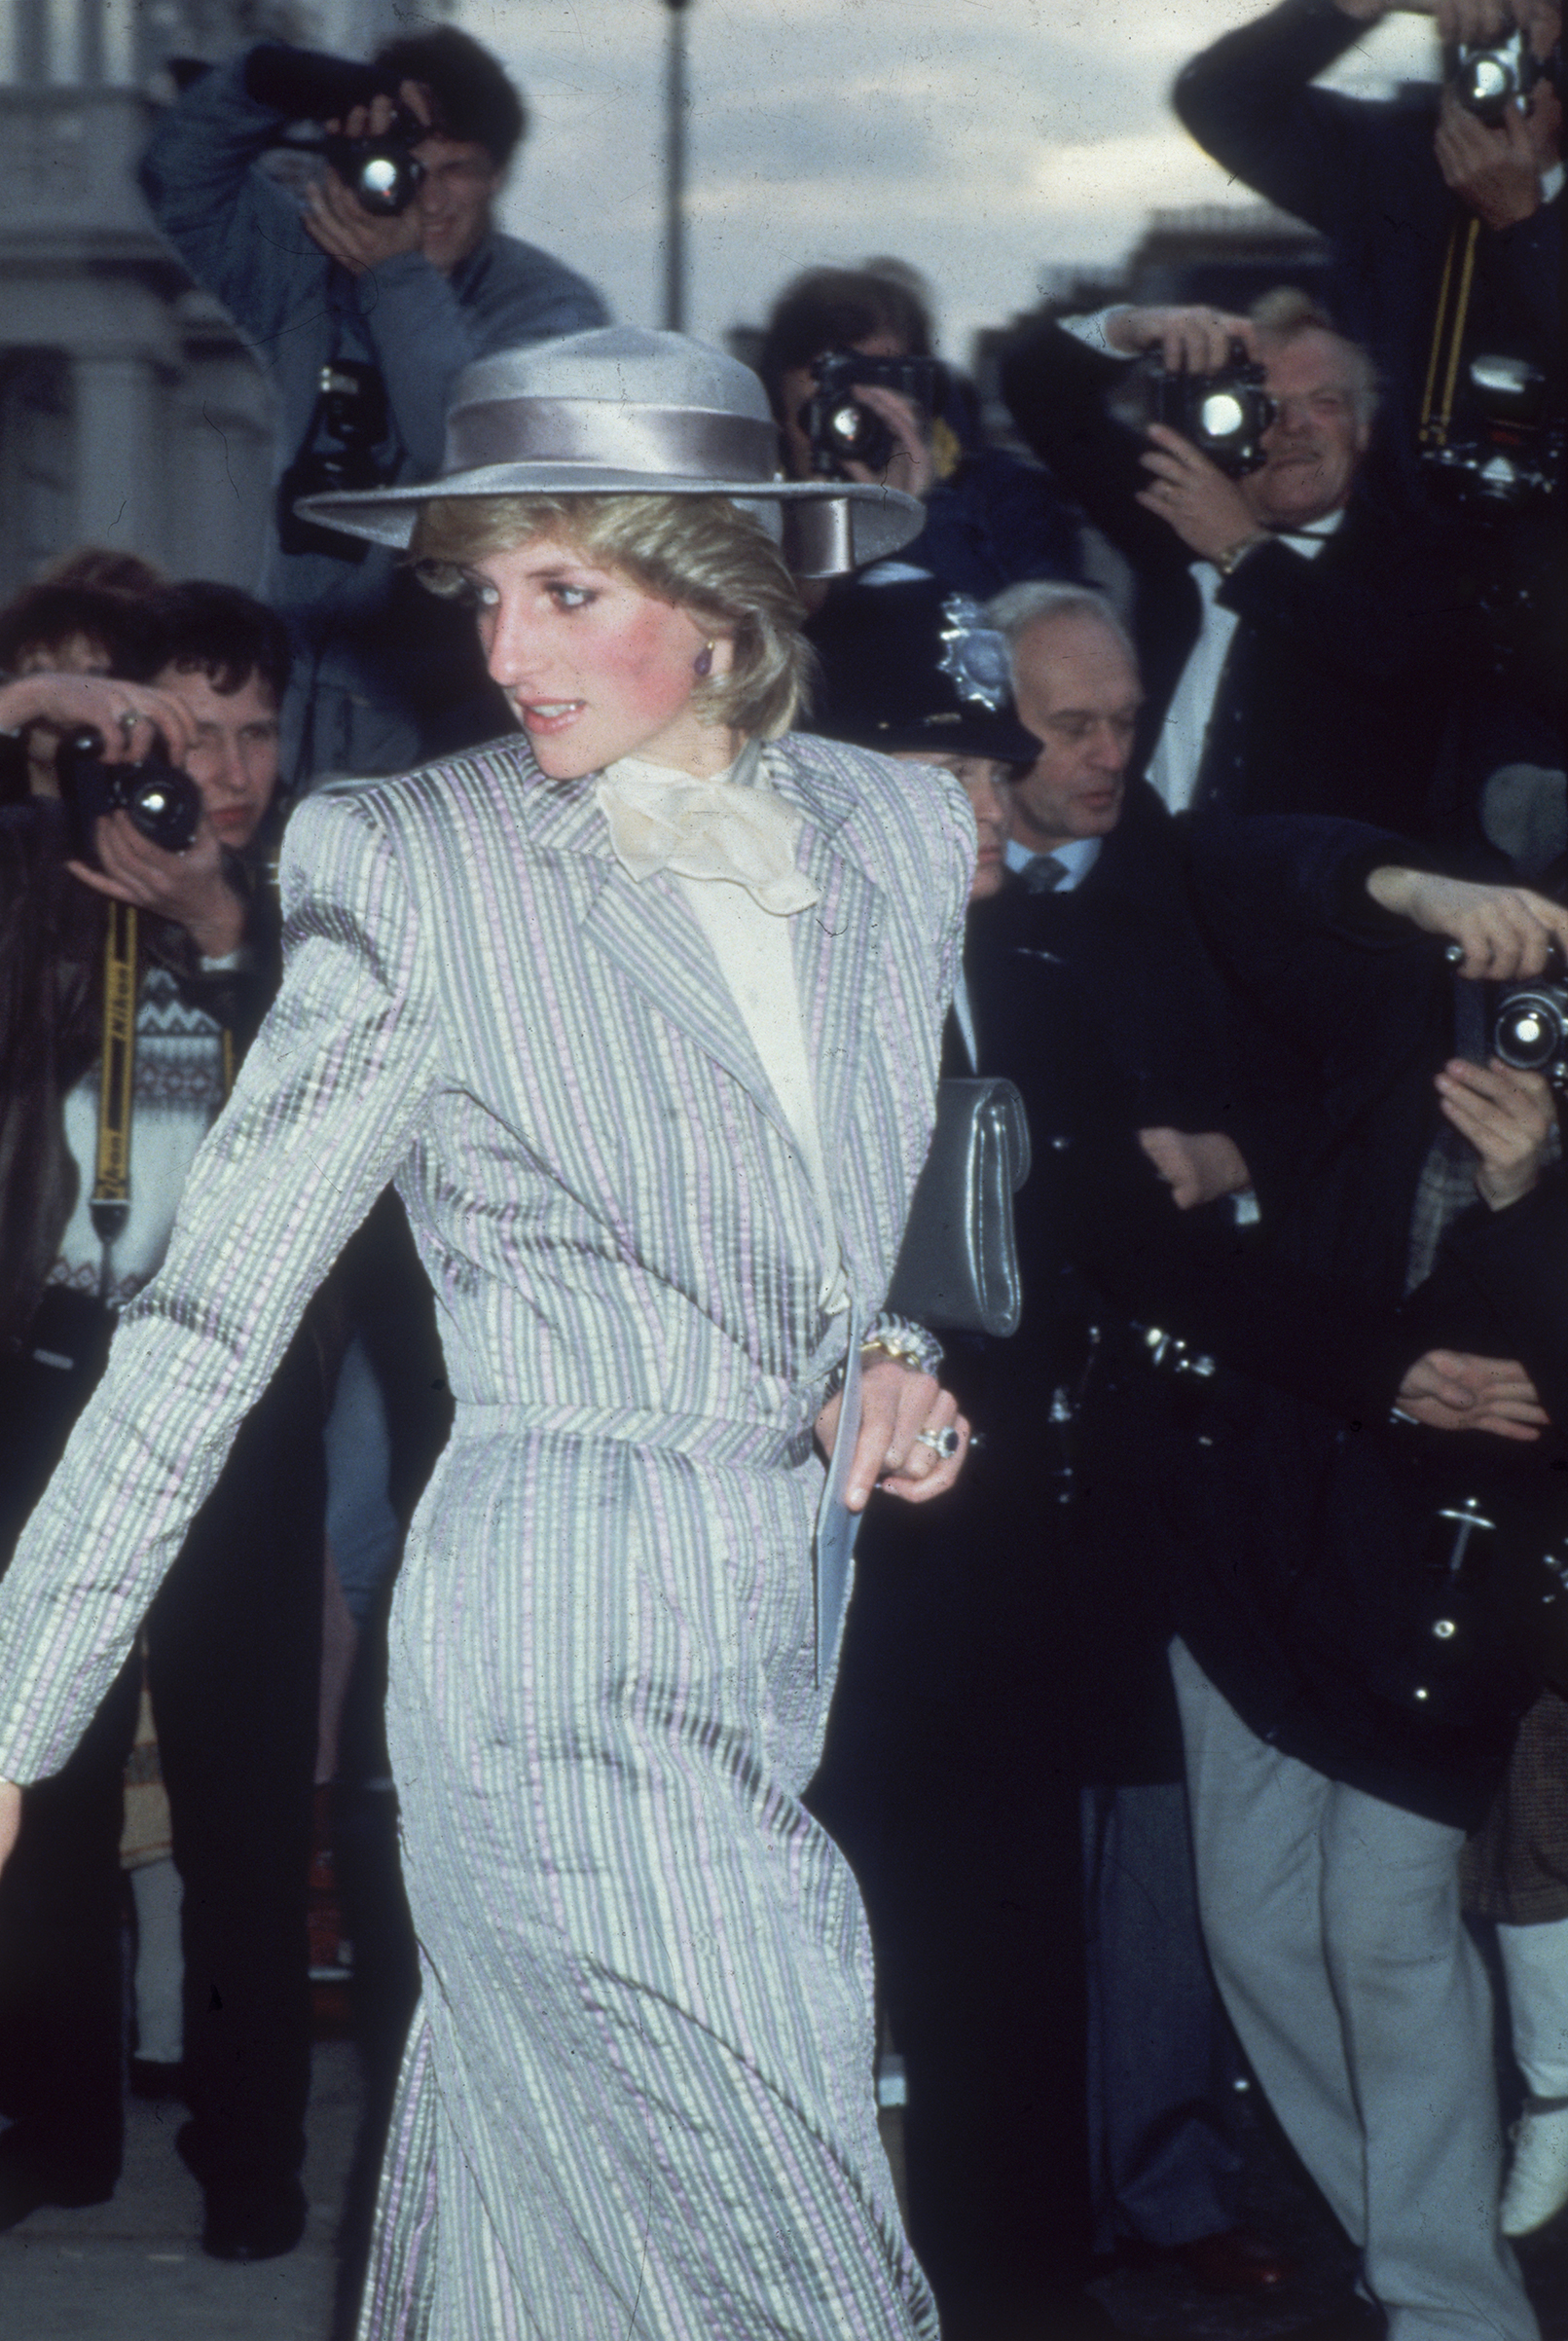 The Princess of Wales attends a wedding in 1983. Hulton Royals Collection/Getty Images (Hulton Royals Collection/Getty Images)